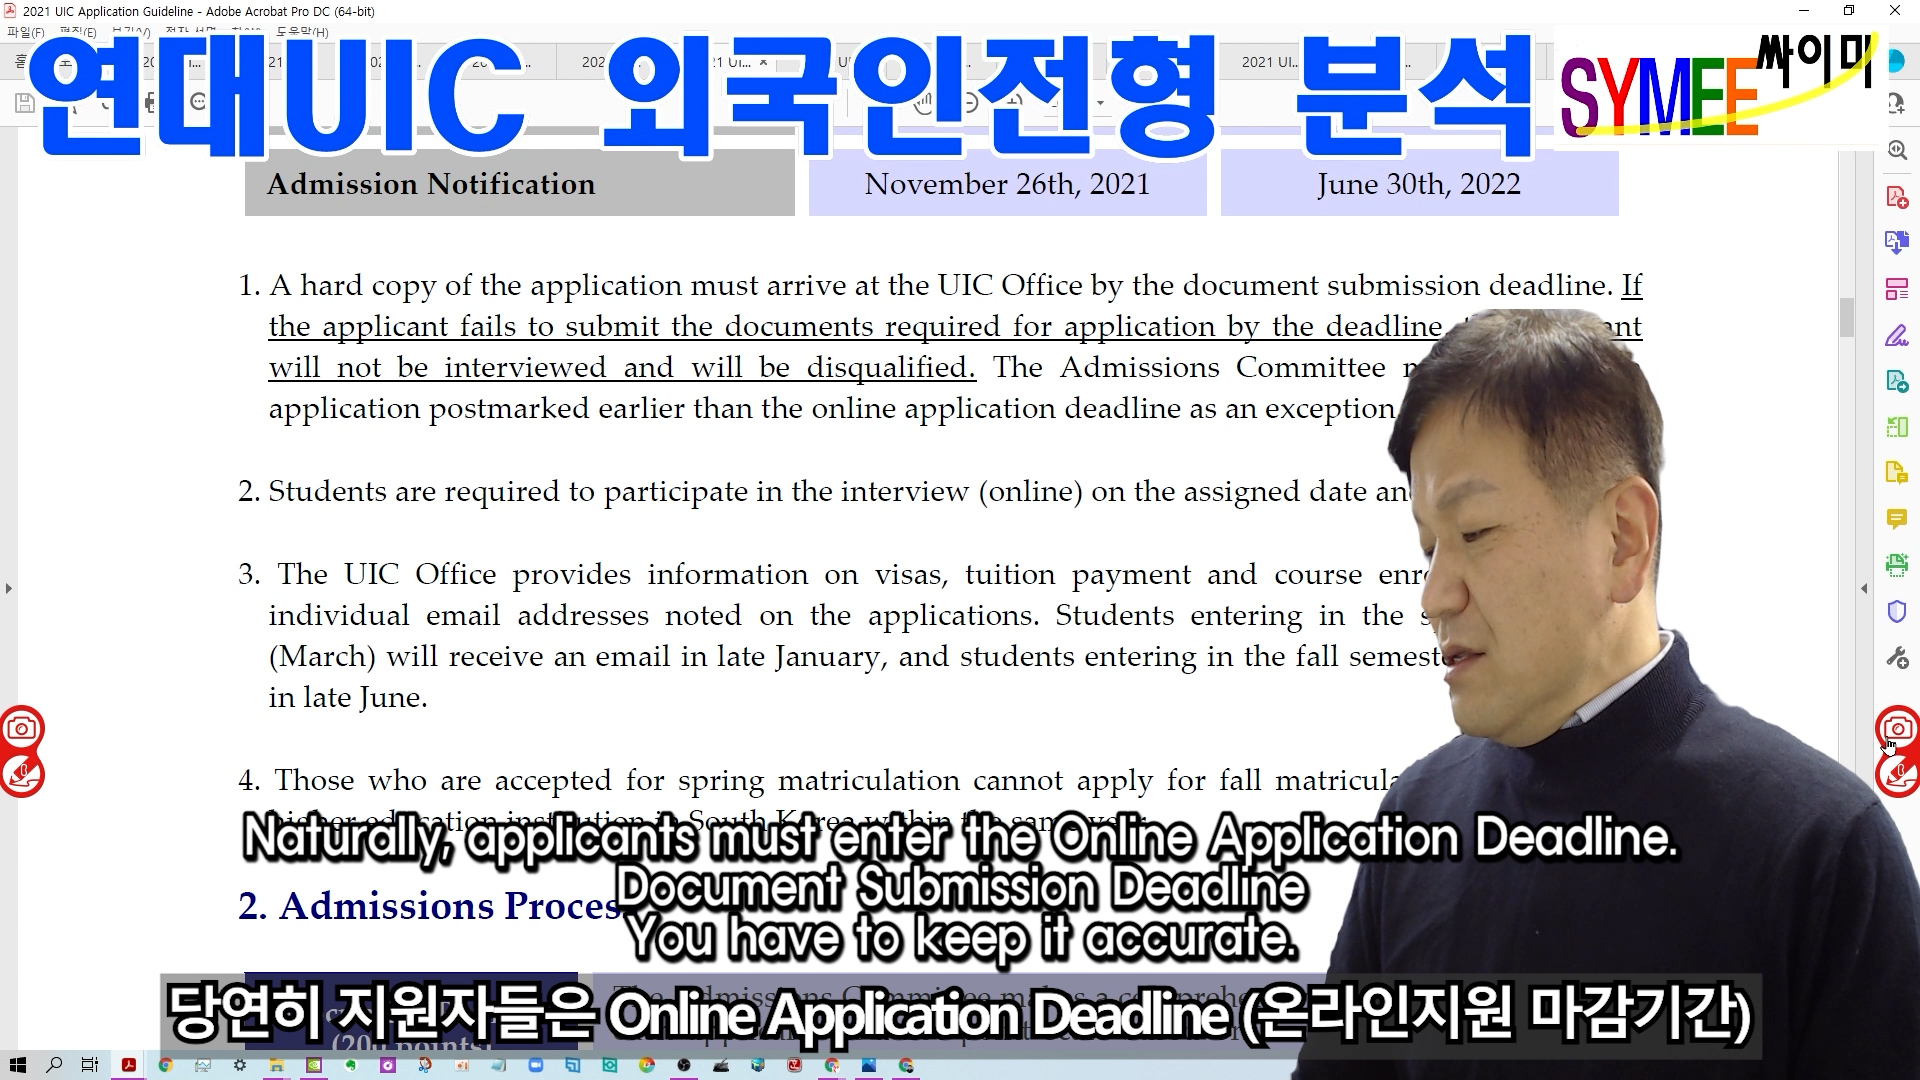 Yonsei Univ. Admission for UIC for Foreign Student 03 Admission Procedure.00_01_57_57.스틸 004.jpg